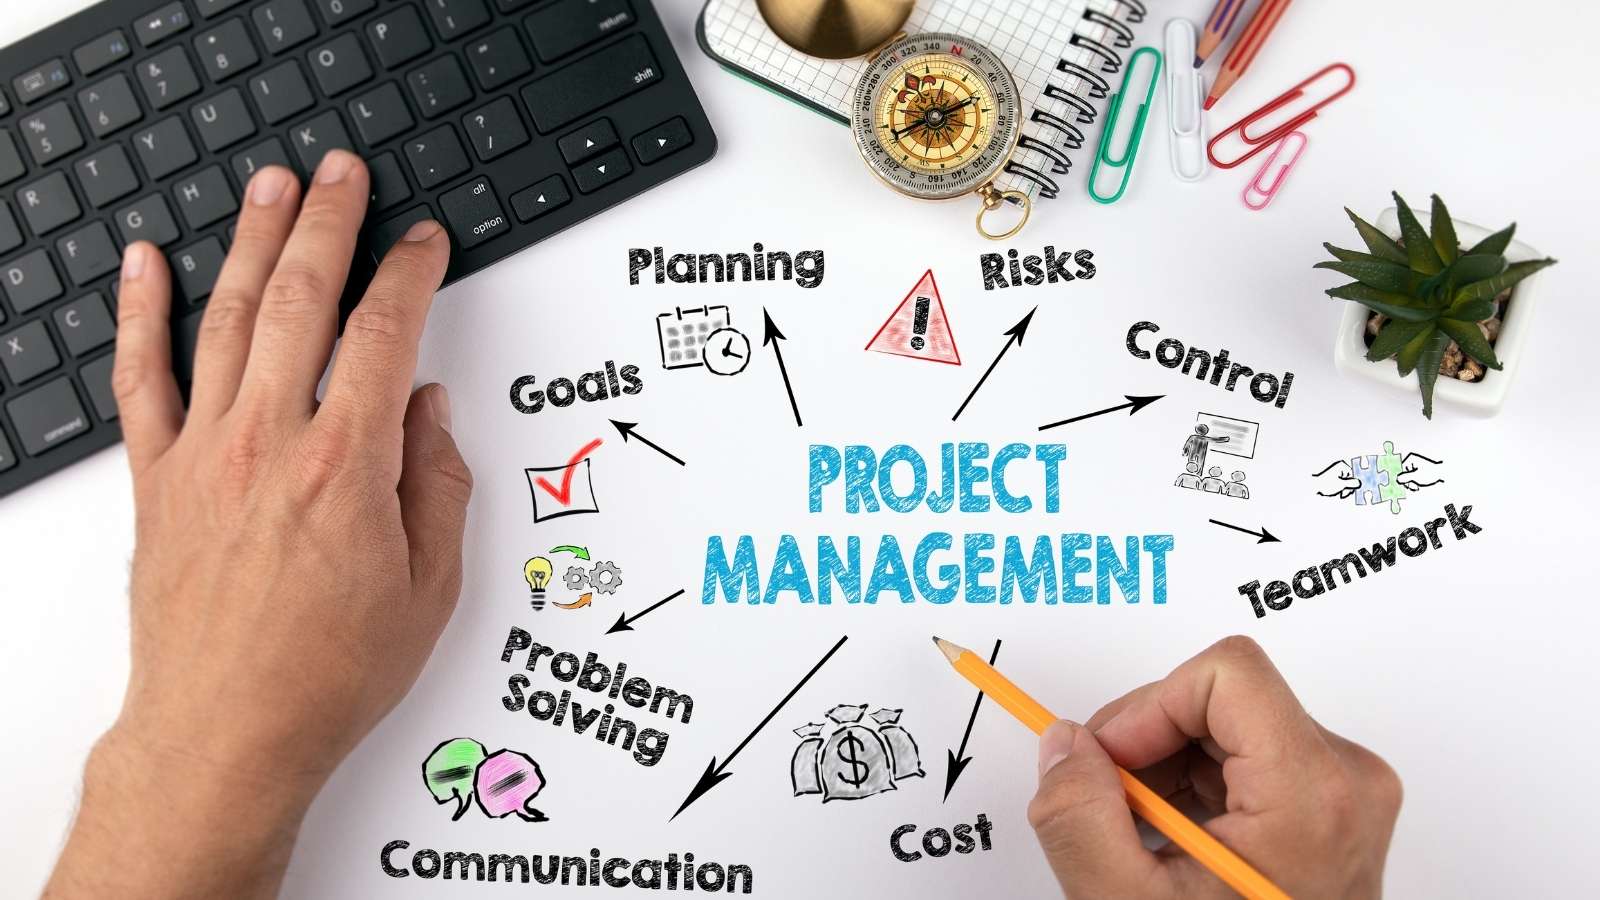 6 project management tips that will help you succeed